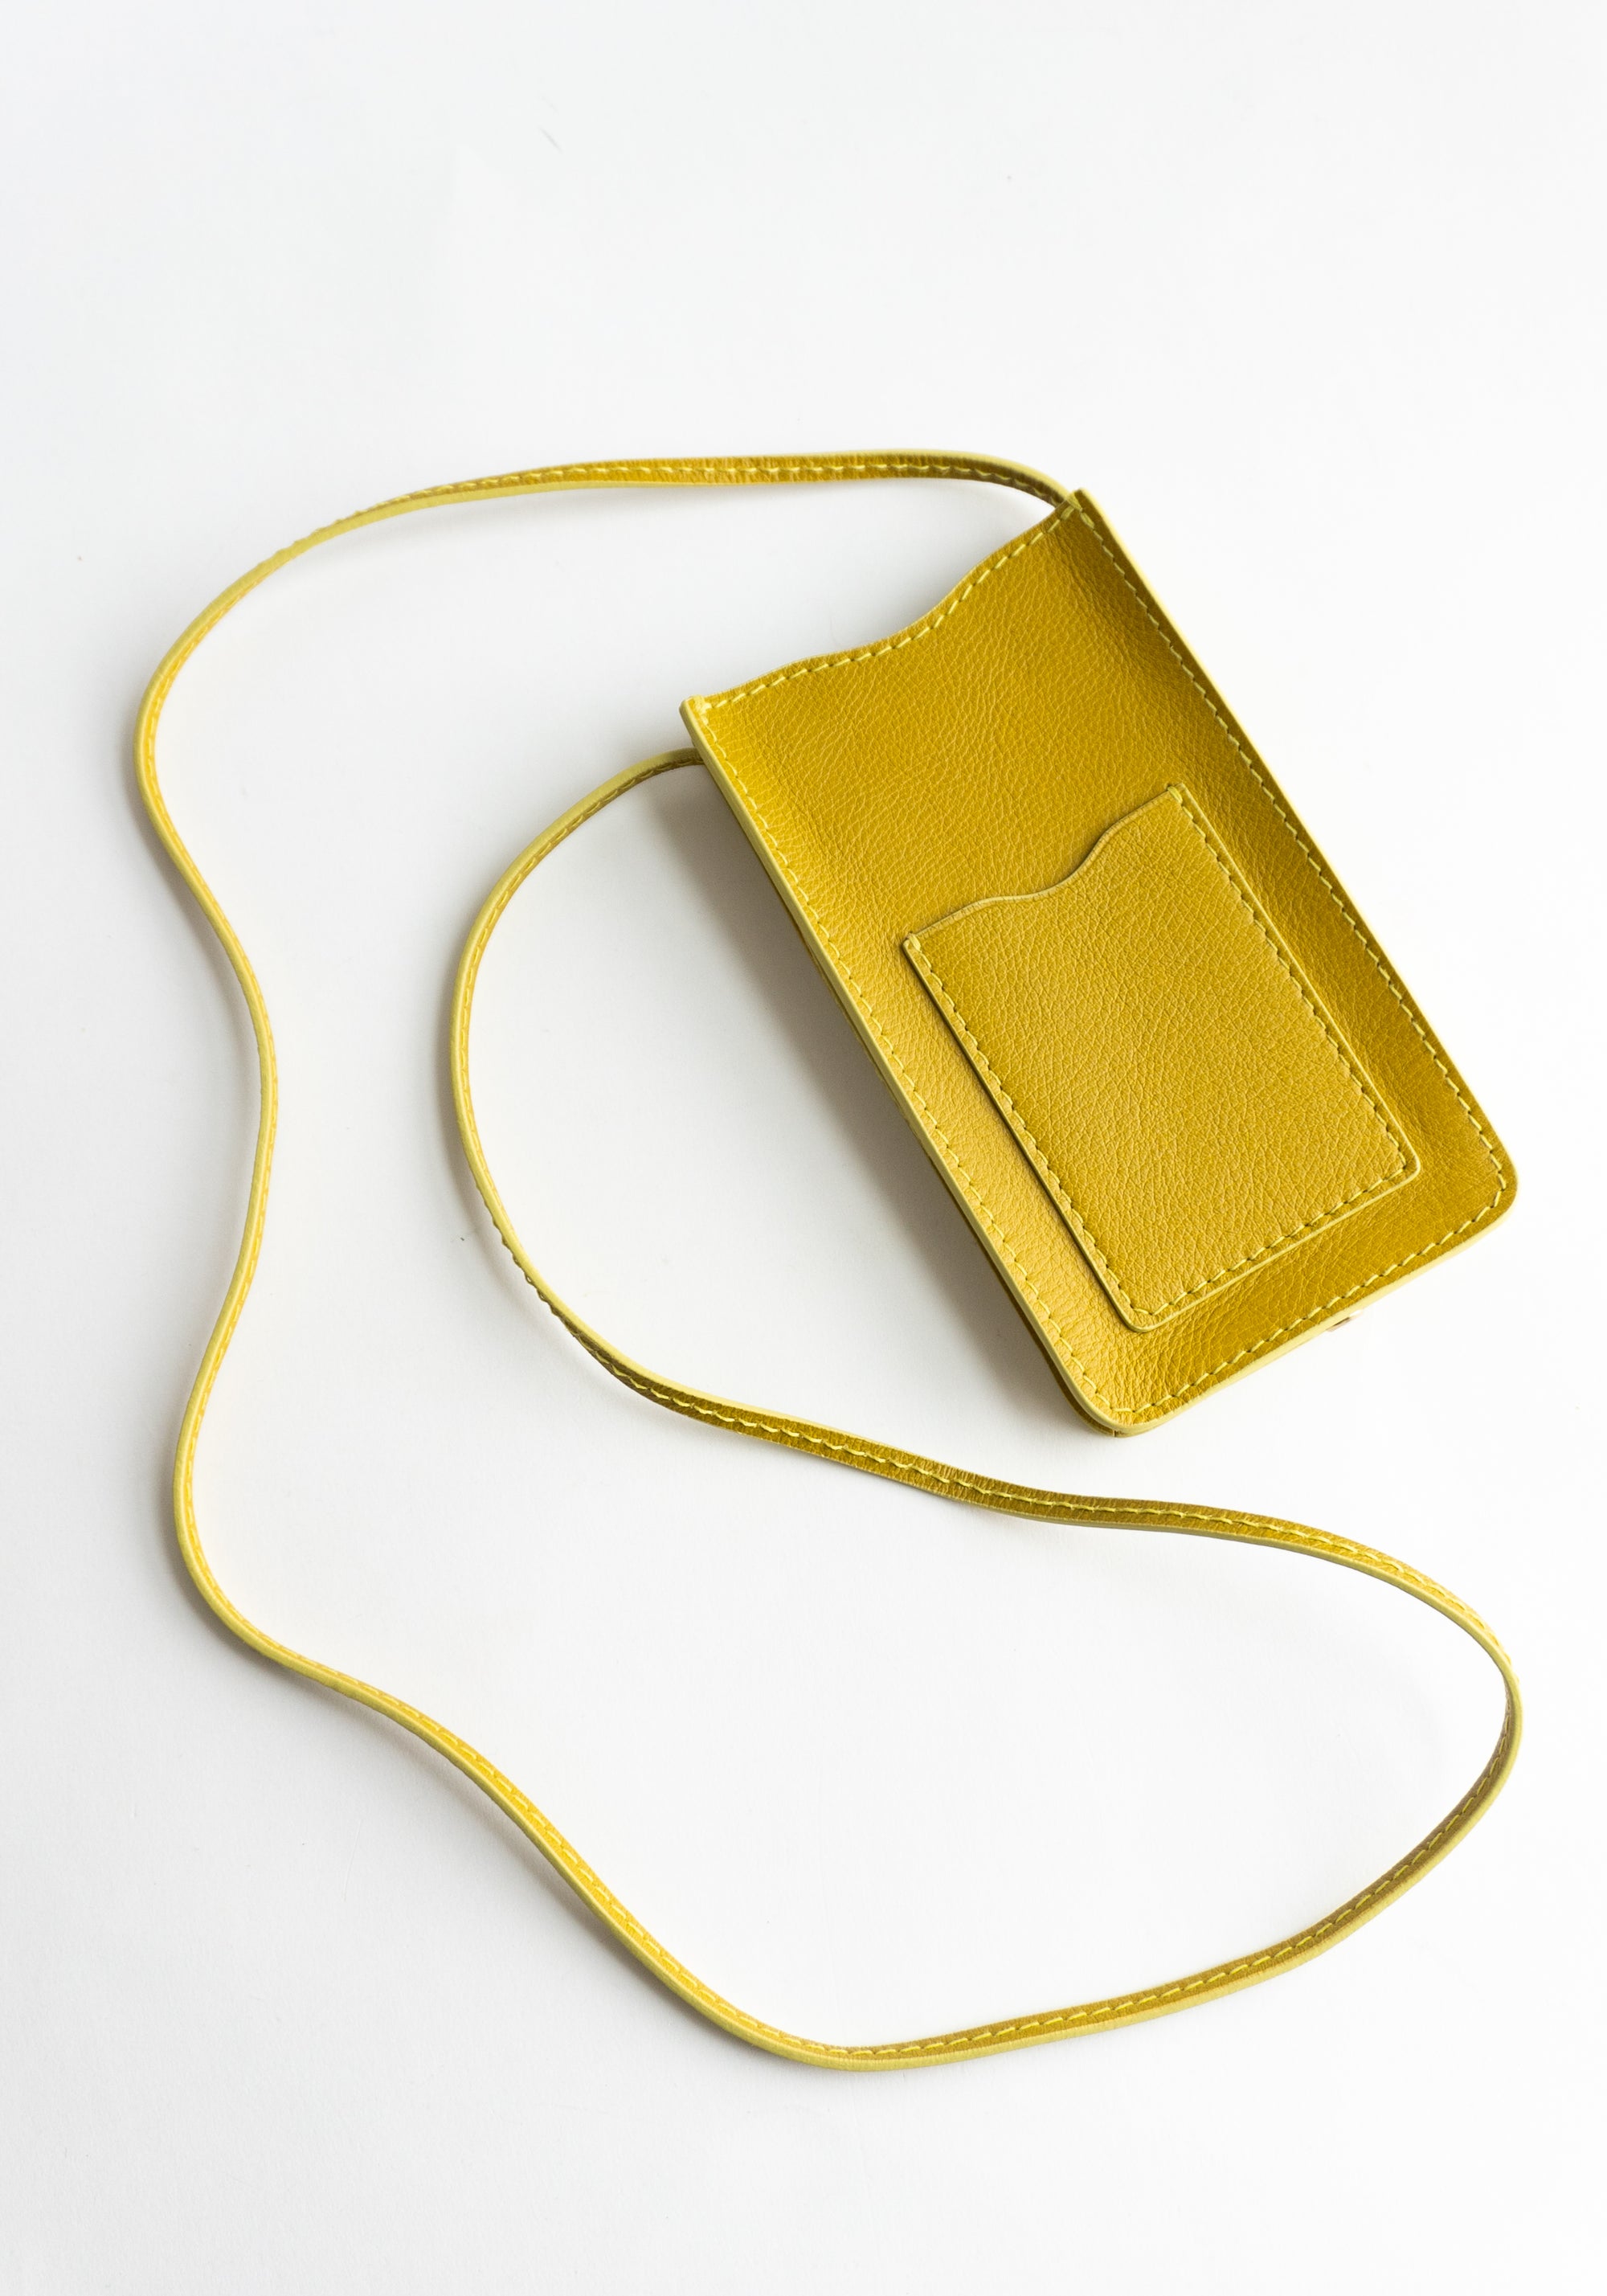 Lindquist Pal Bag in Chartreuse